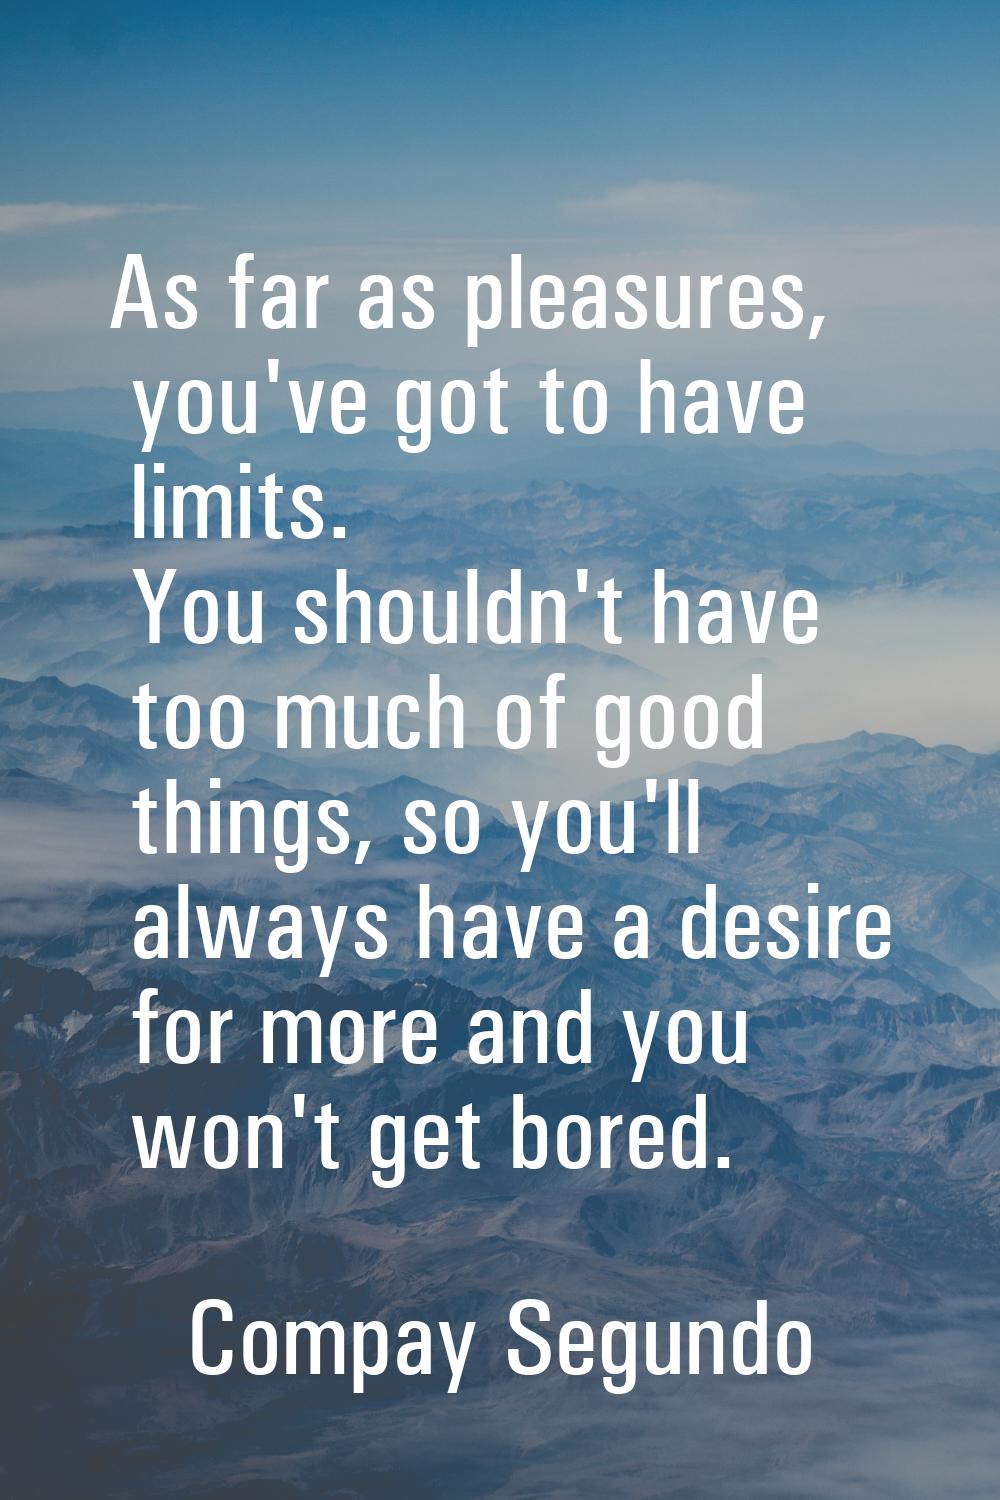 As far as pleasures, you've got to have limits. You shouldn't have too much of good things, so you'